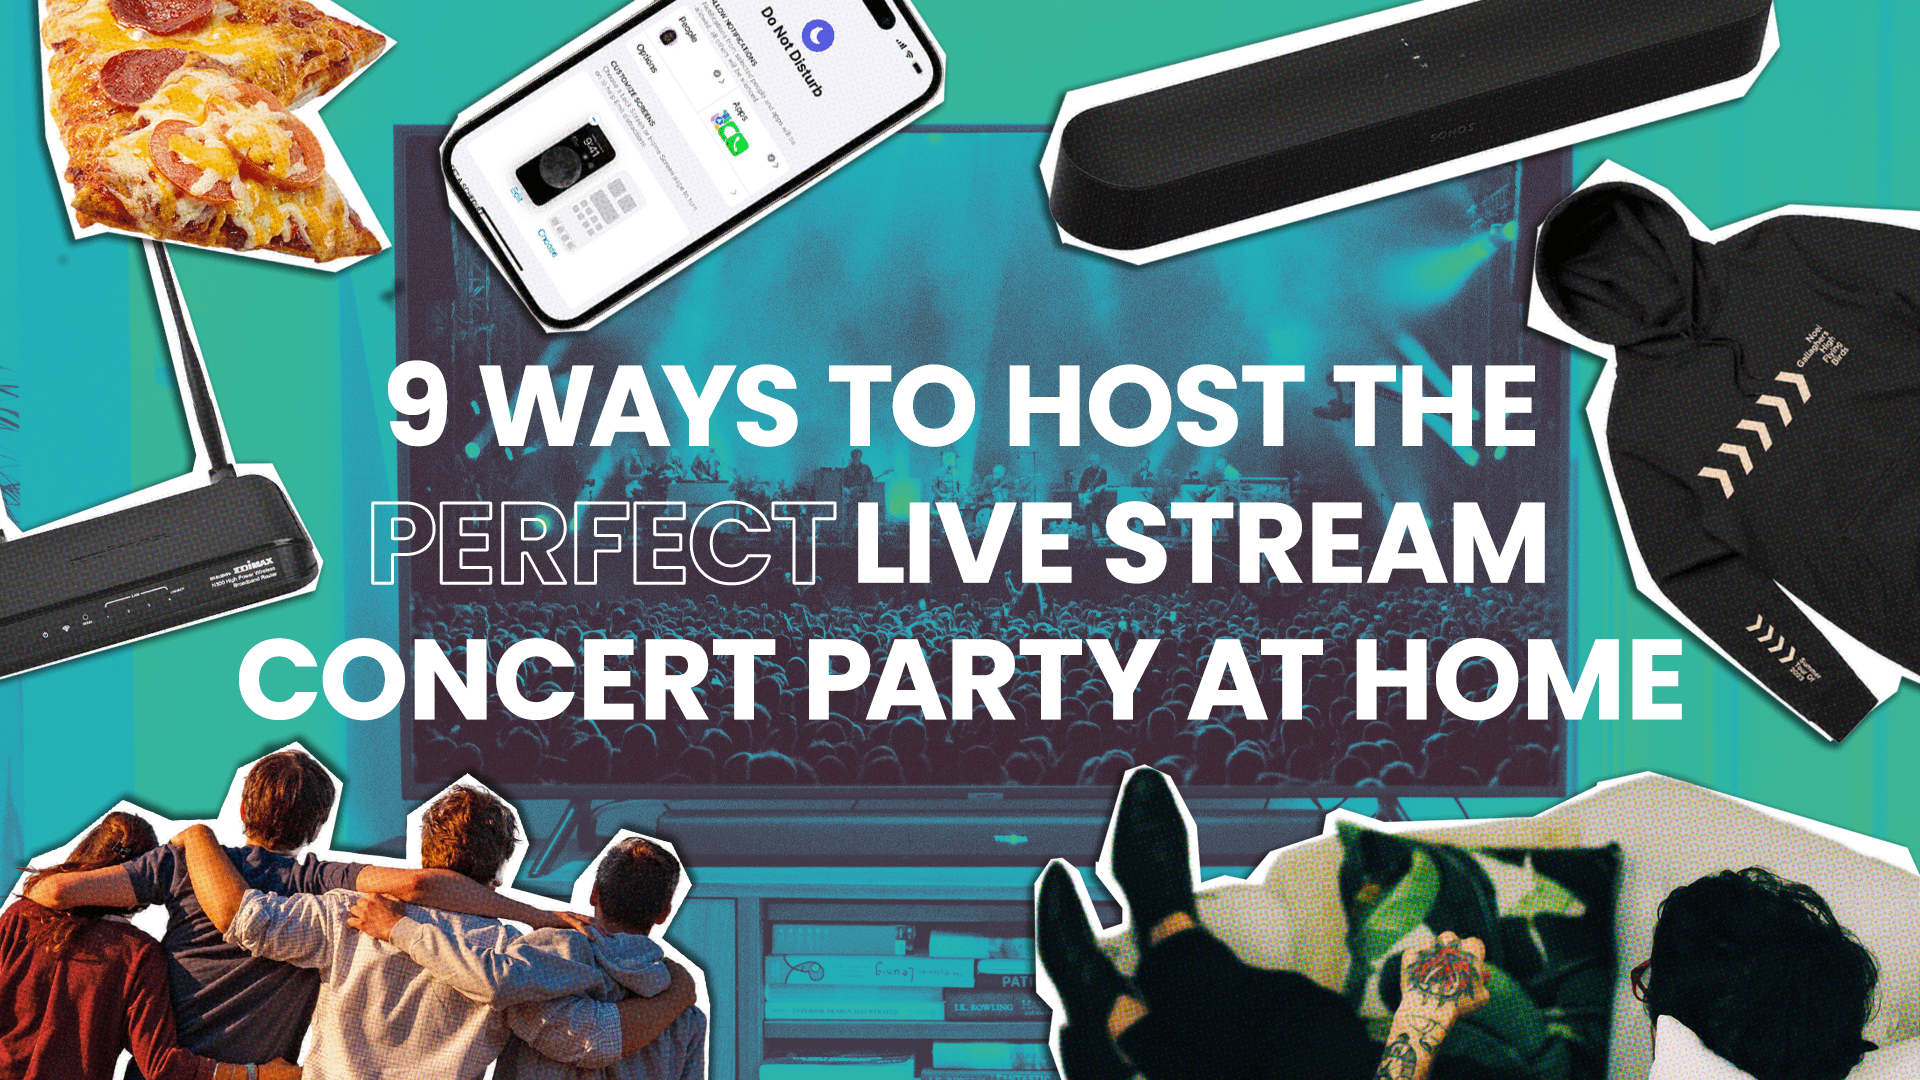 9 ways to host the perfect live stream party at home